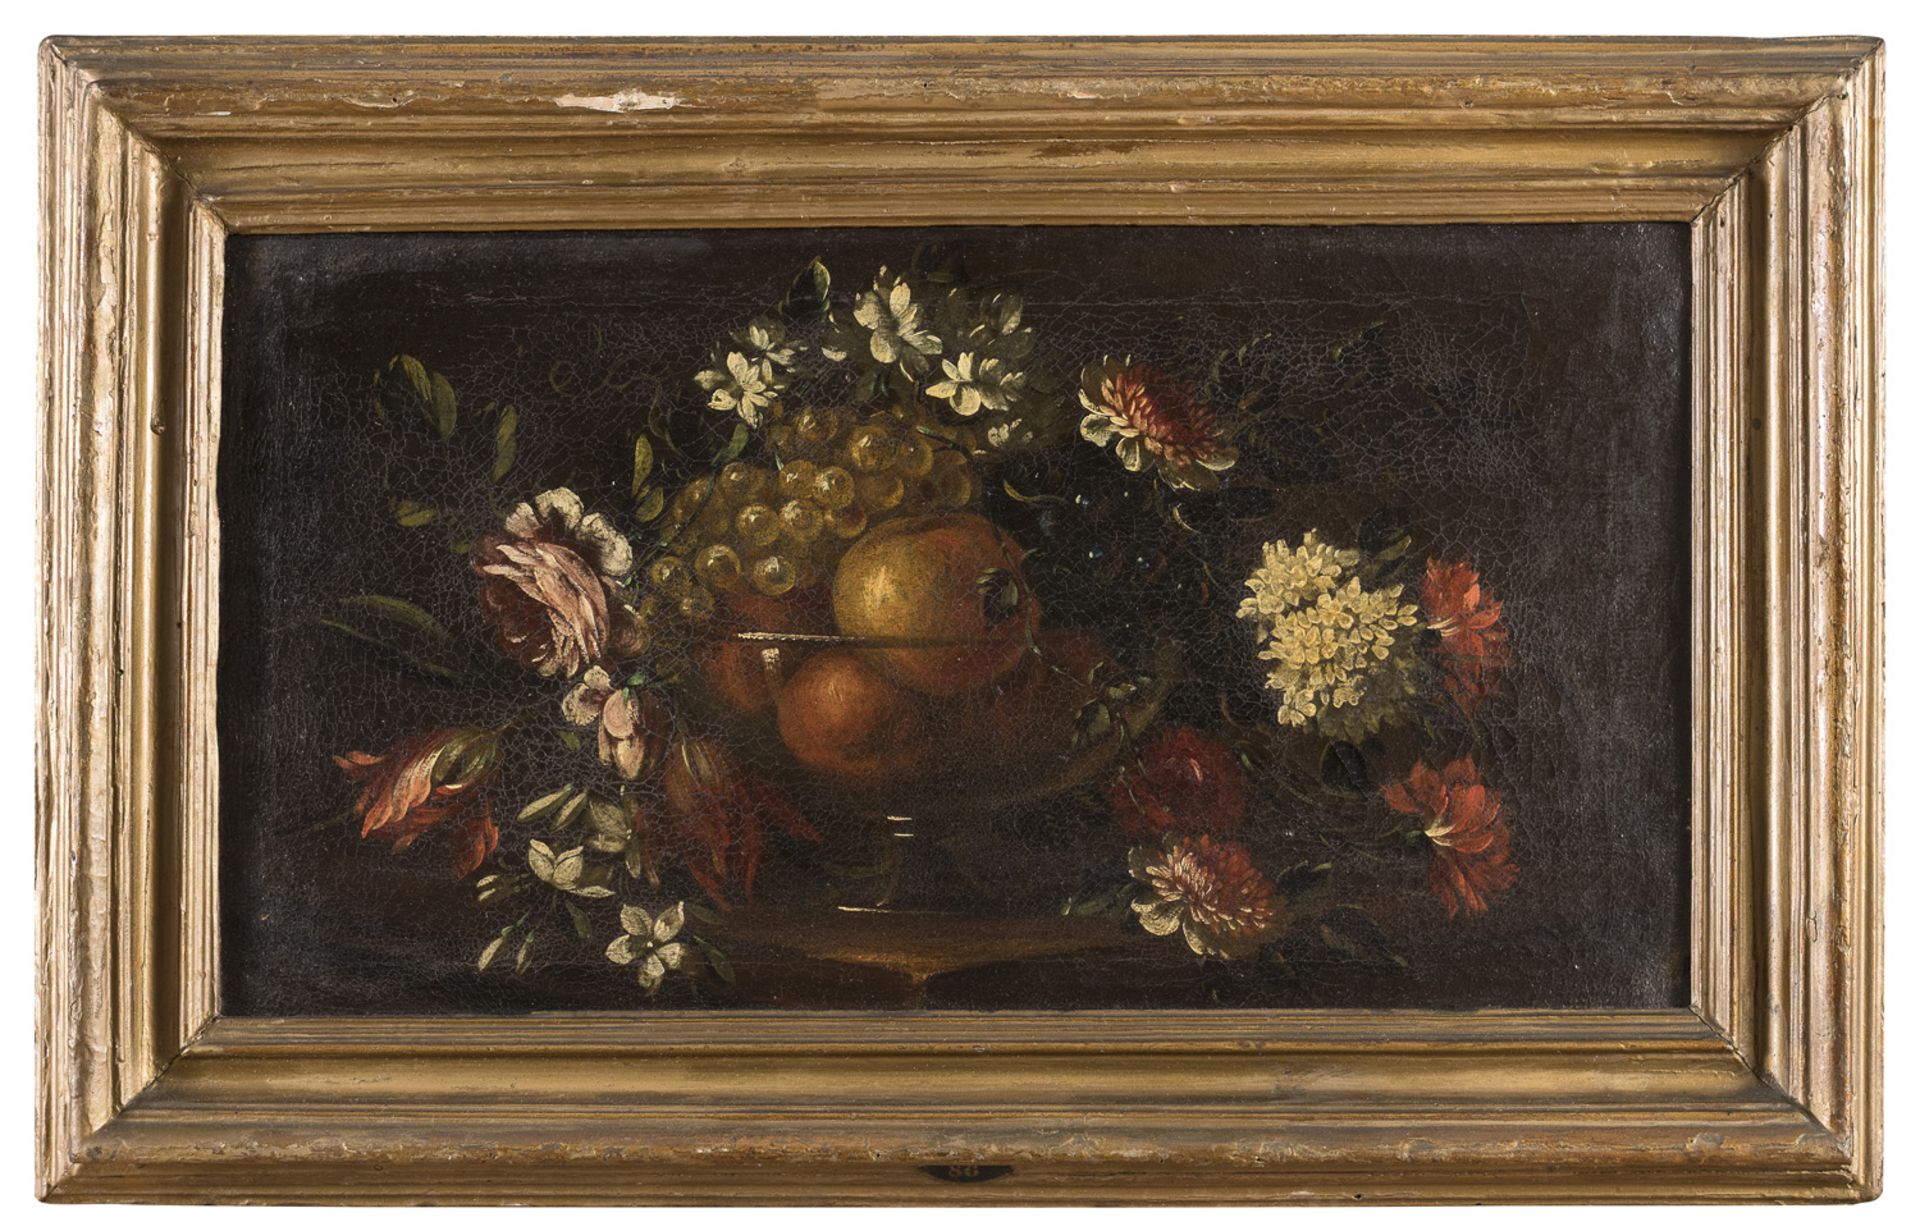 STILL LIFE OIL PAINTING OF FLOWERS AND FRUITS BY ROMAN PAINTER 18TH CENTURY